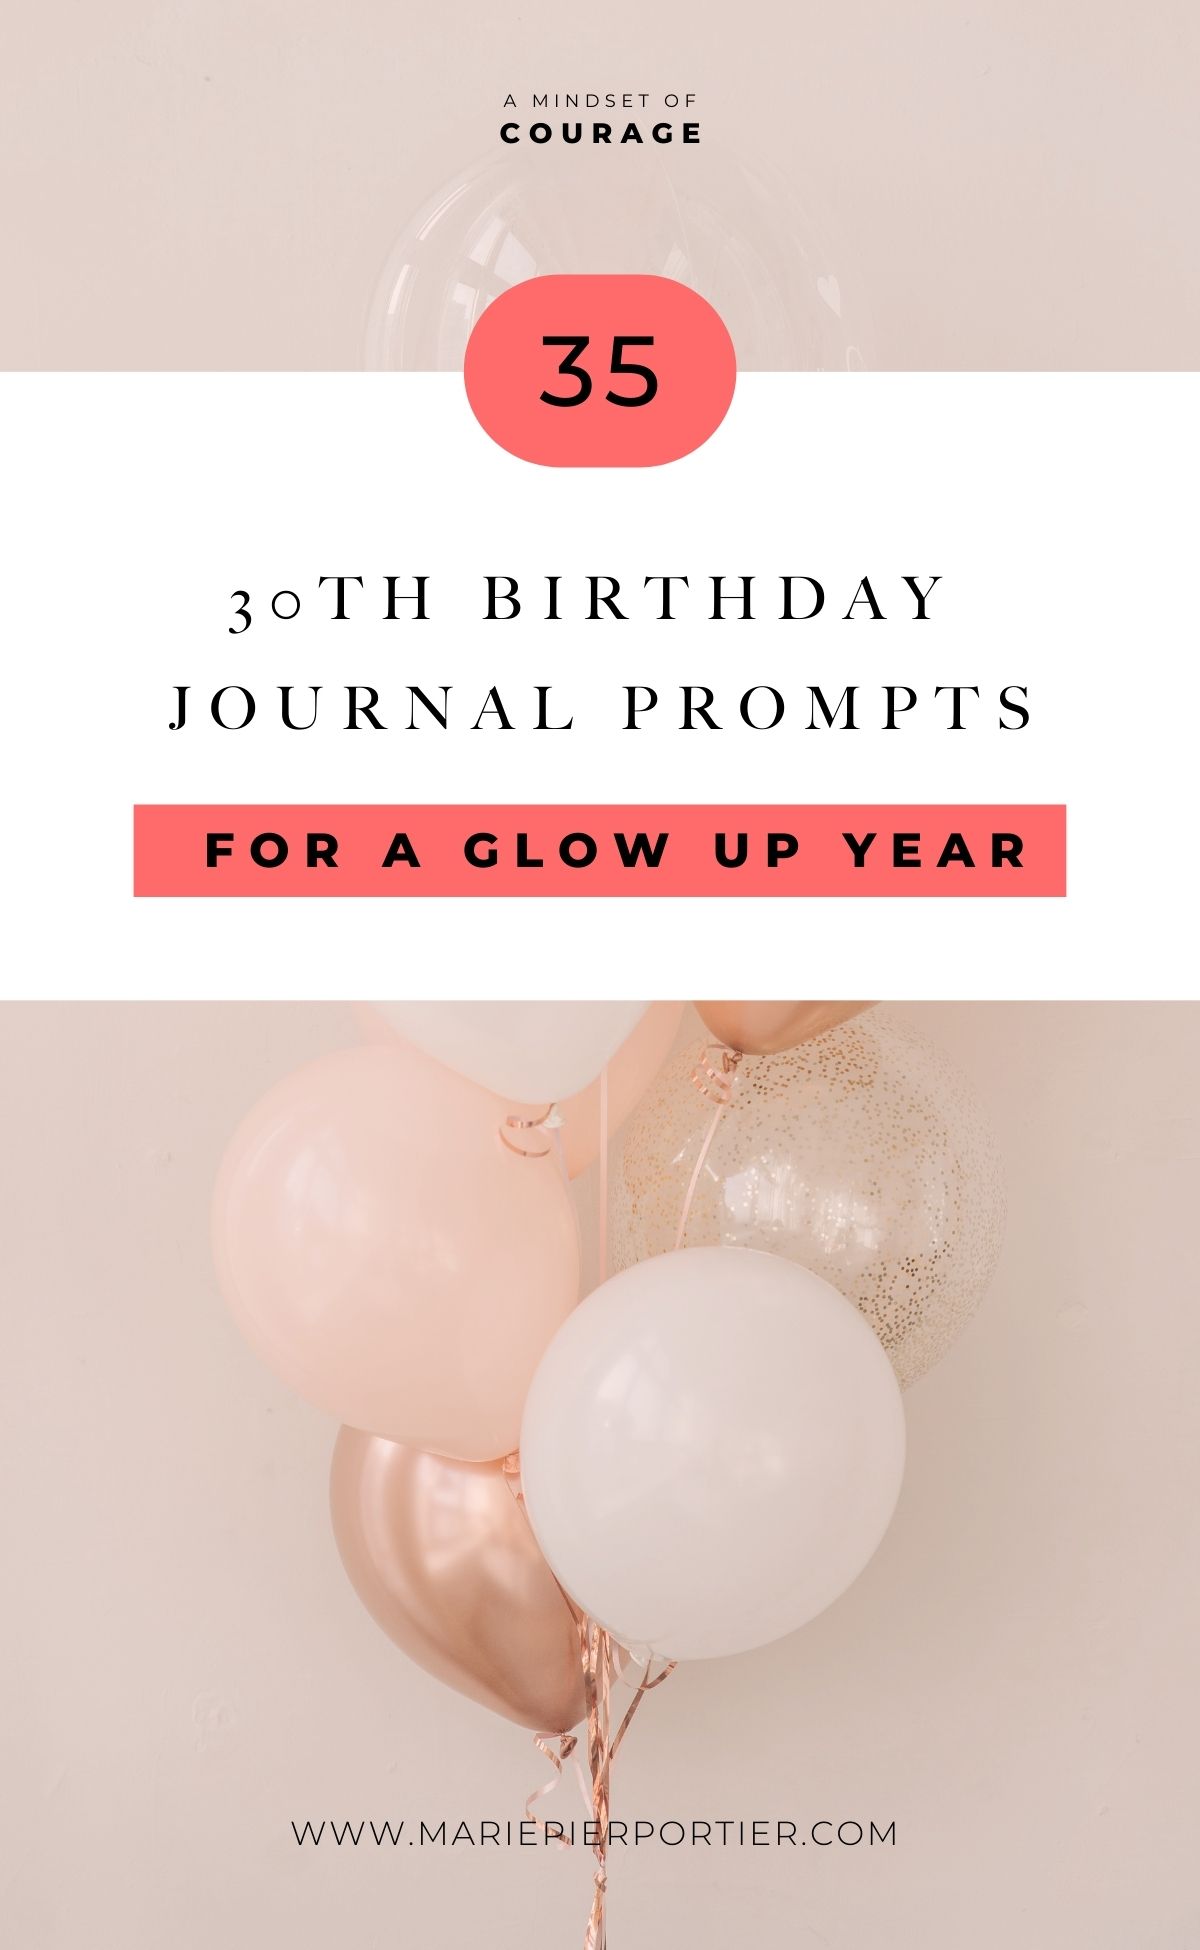 35 Birthday Journal Prompts For A Glow Up Year